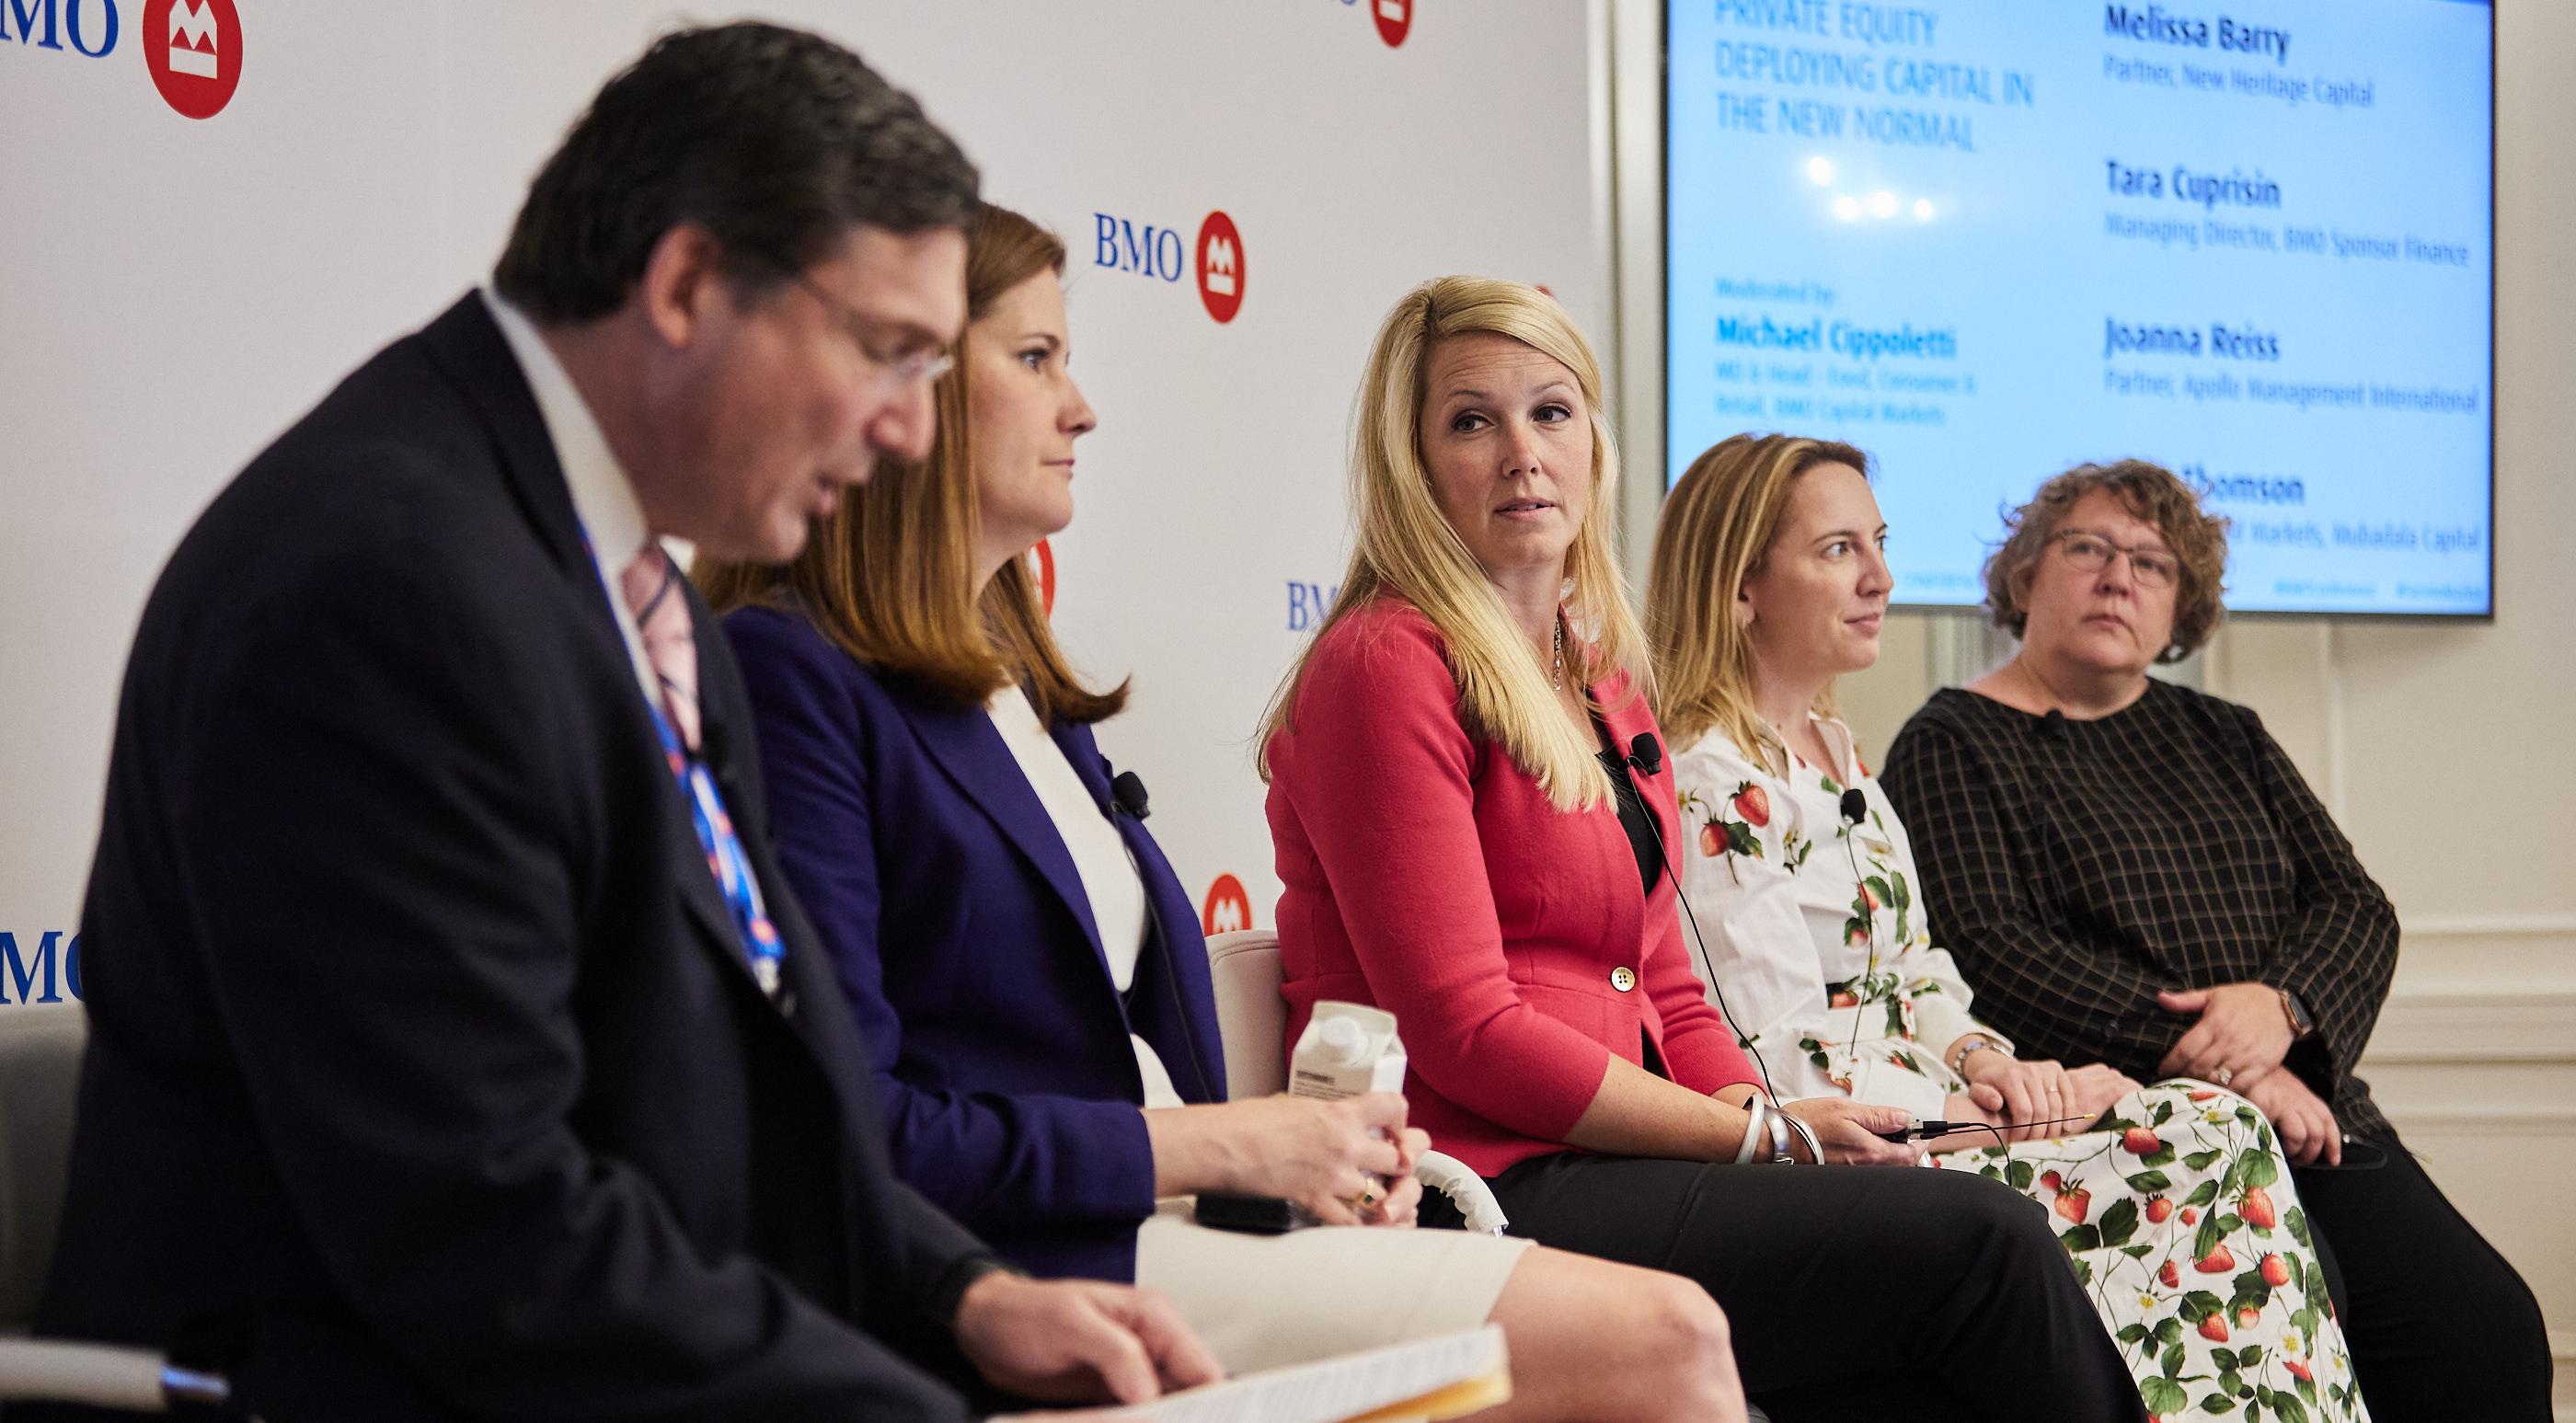 Private Equity panel at BMO's Farm to Market Conference